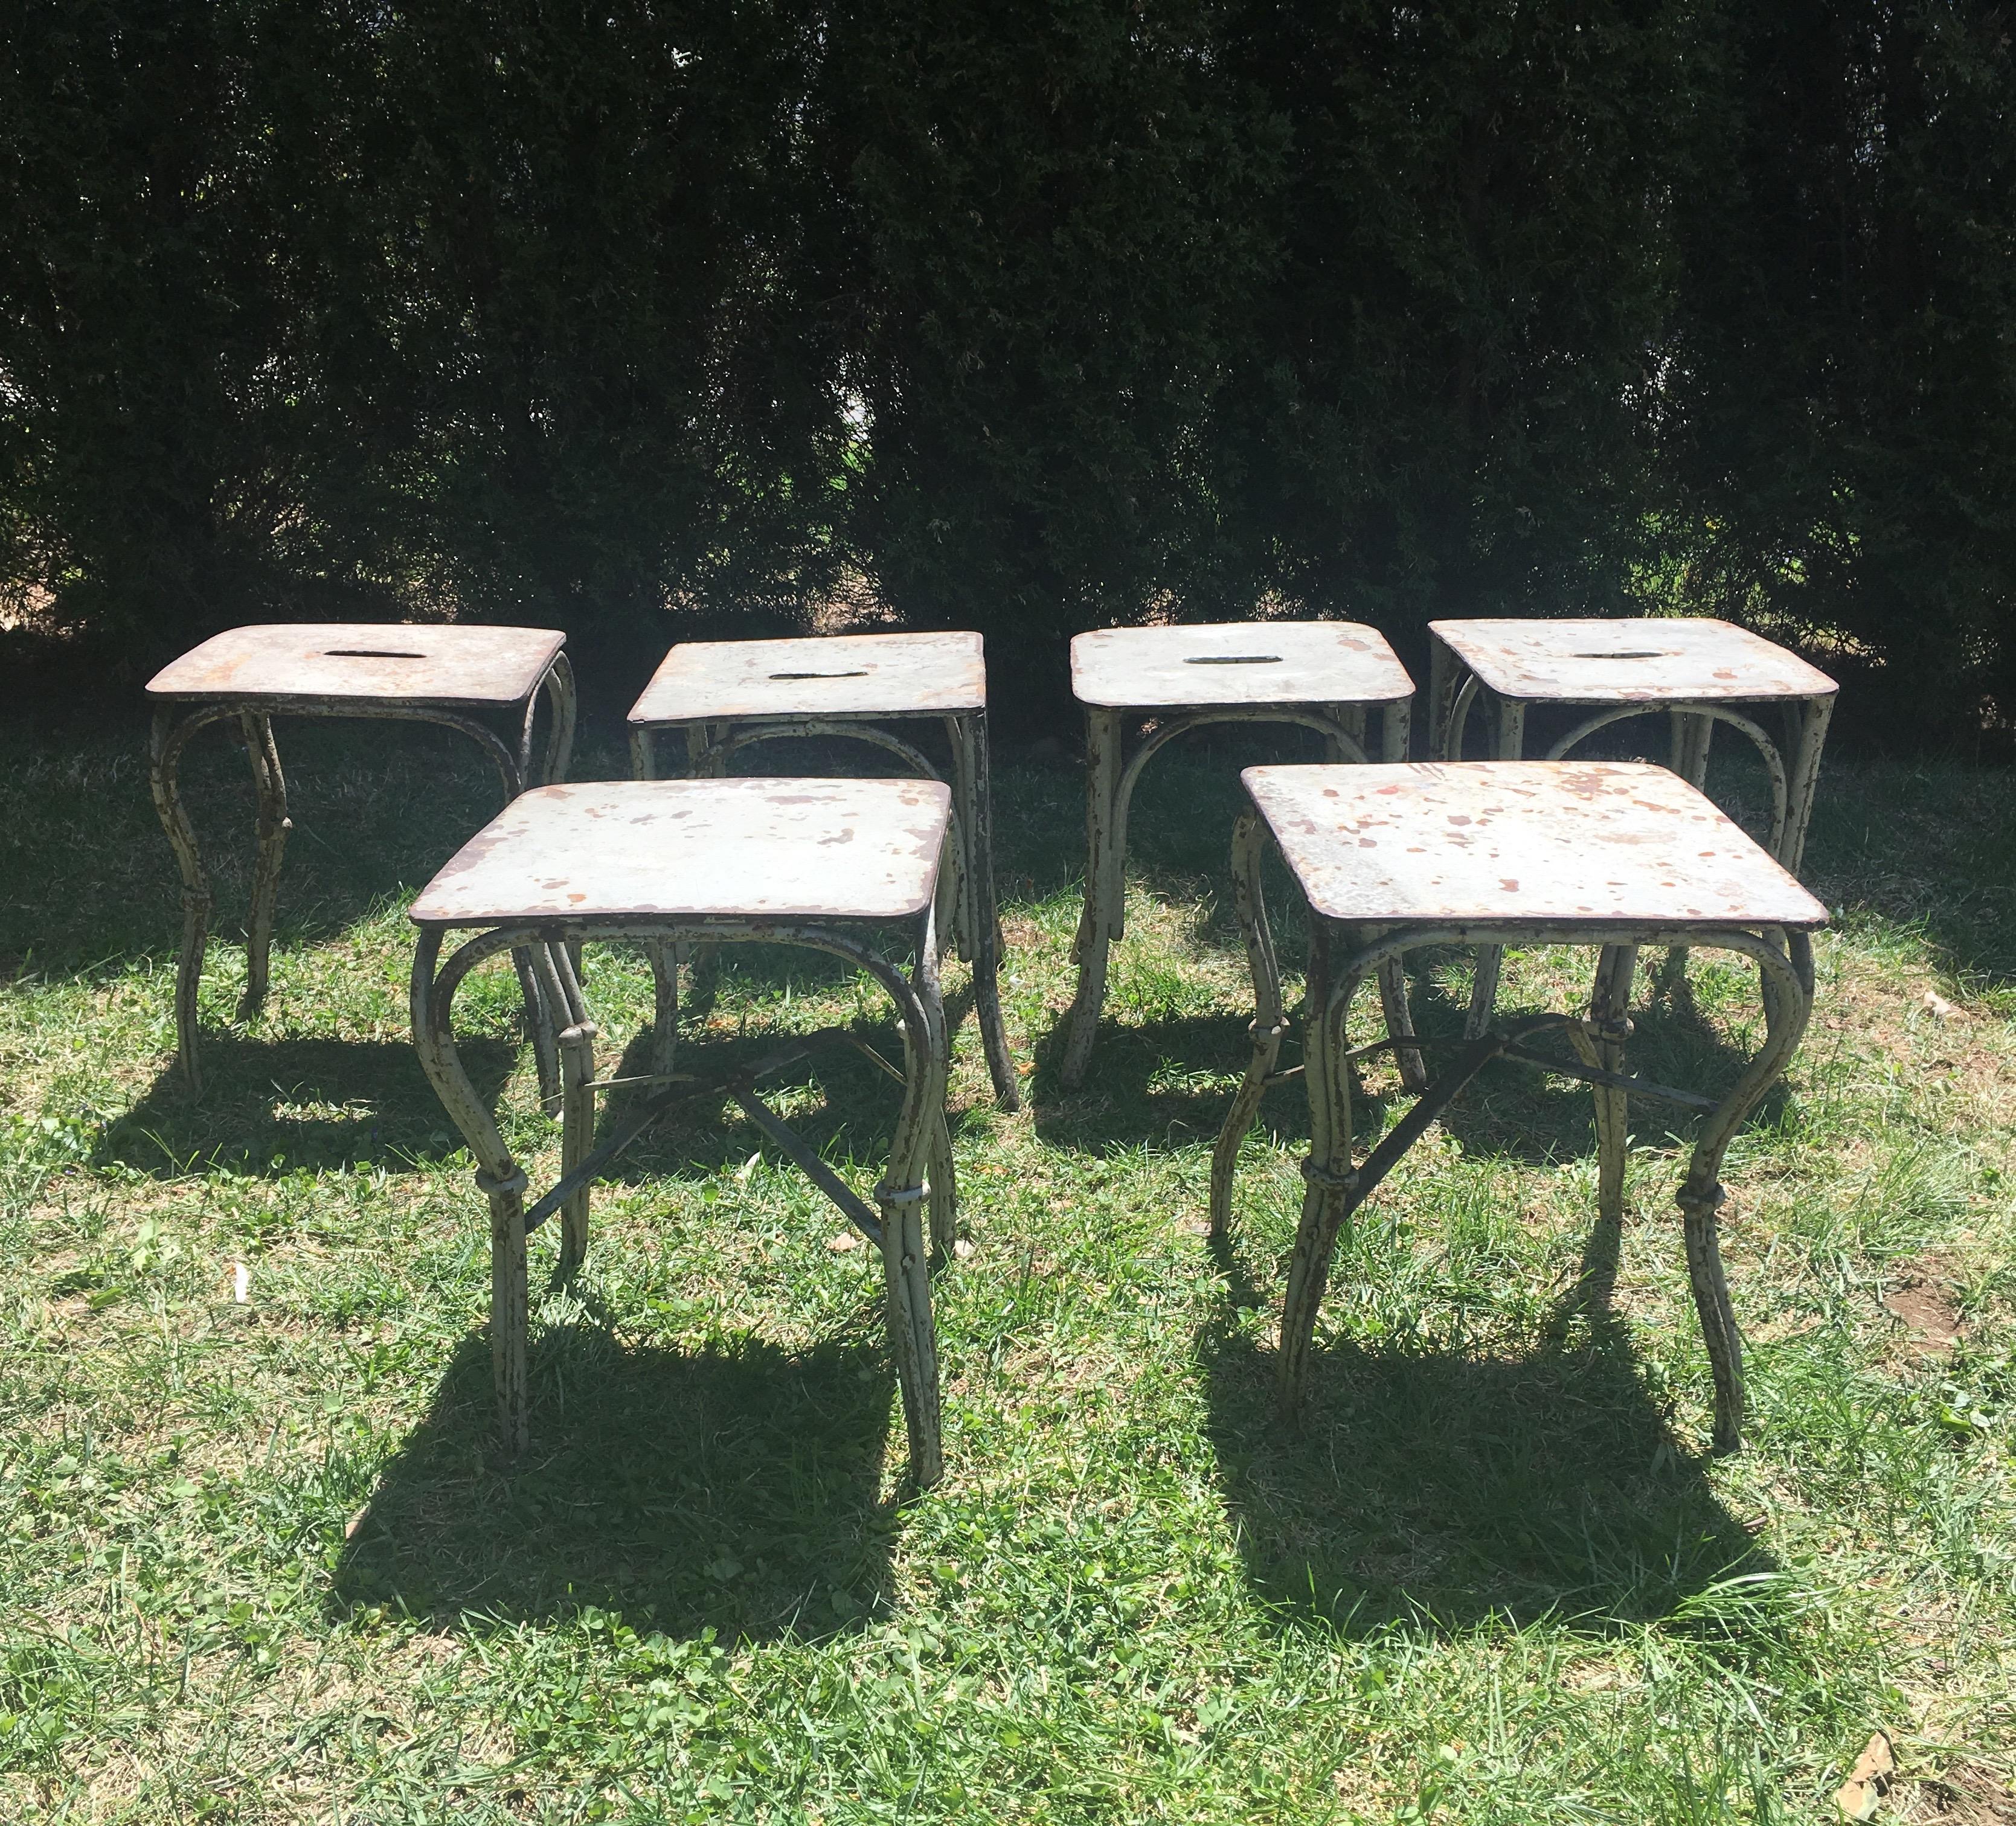 These wonderful little garden stools or side tables were handmade in the late 19th or early 20th century and they are beautifully-crafted. Two have solid tops and slightly different, more elaborate legs, while four have tops with slots (to let the